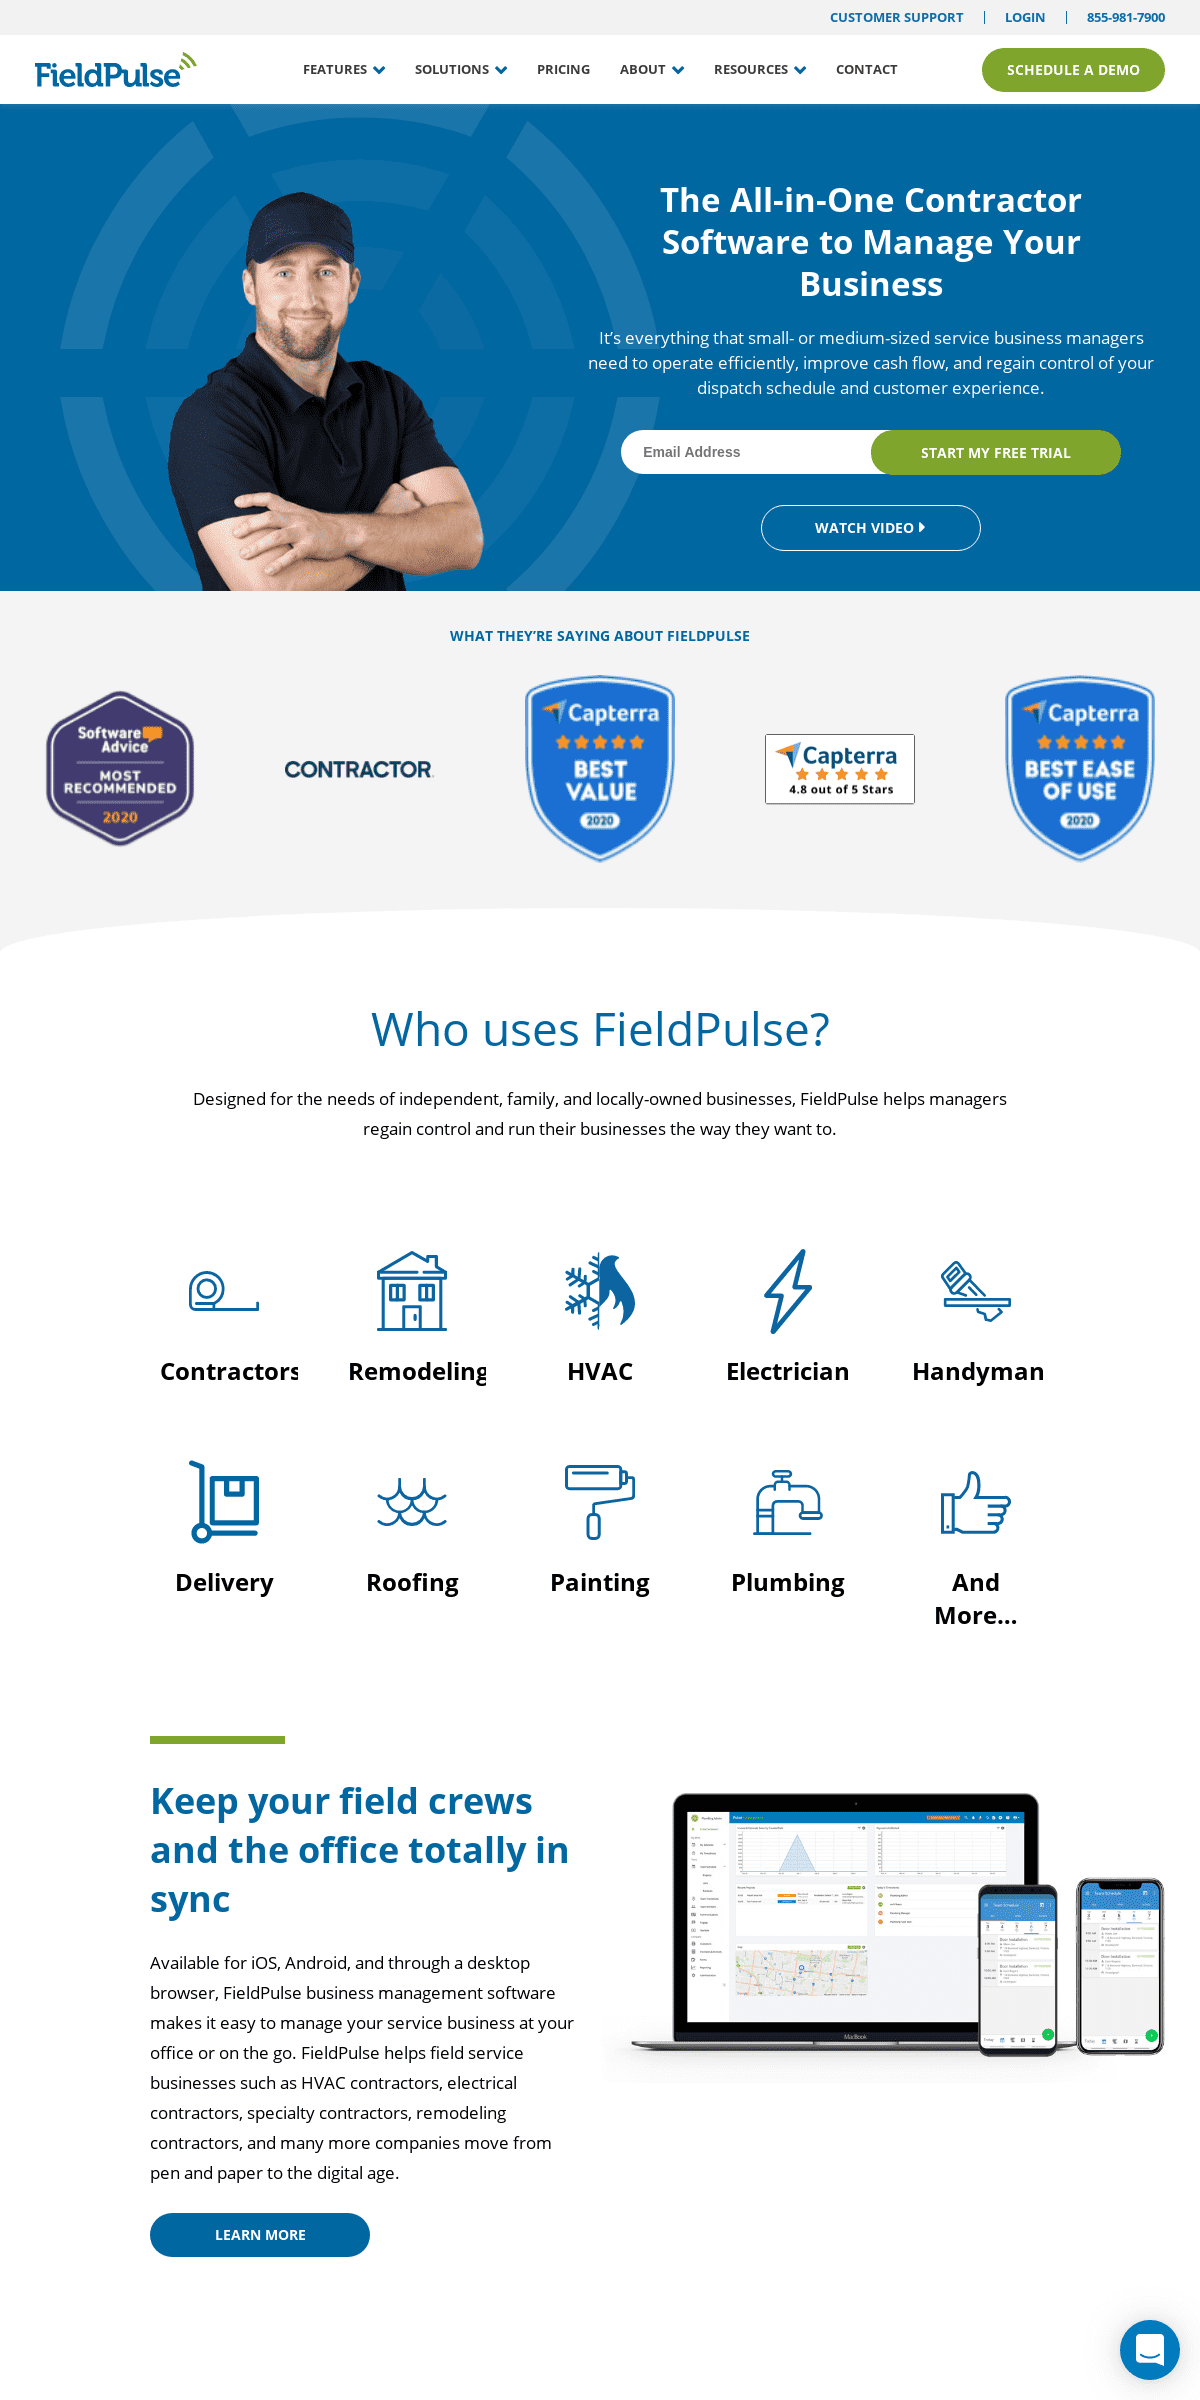 A complete backup of fieldpulse.com